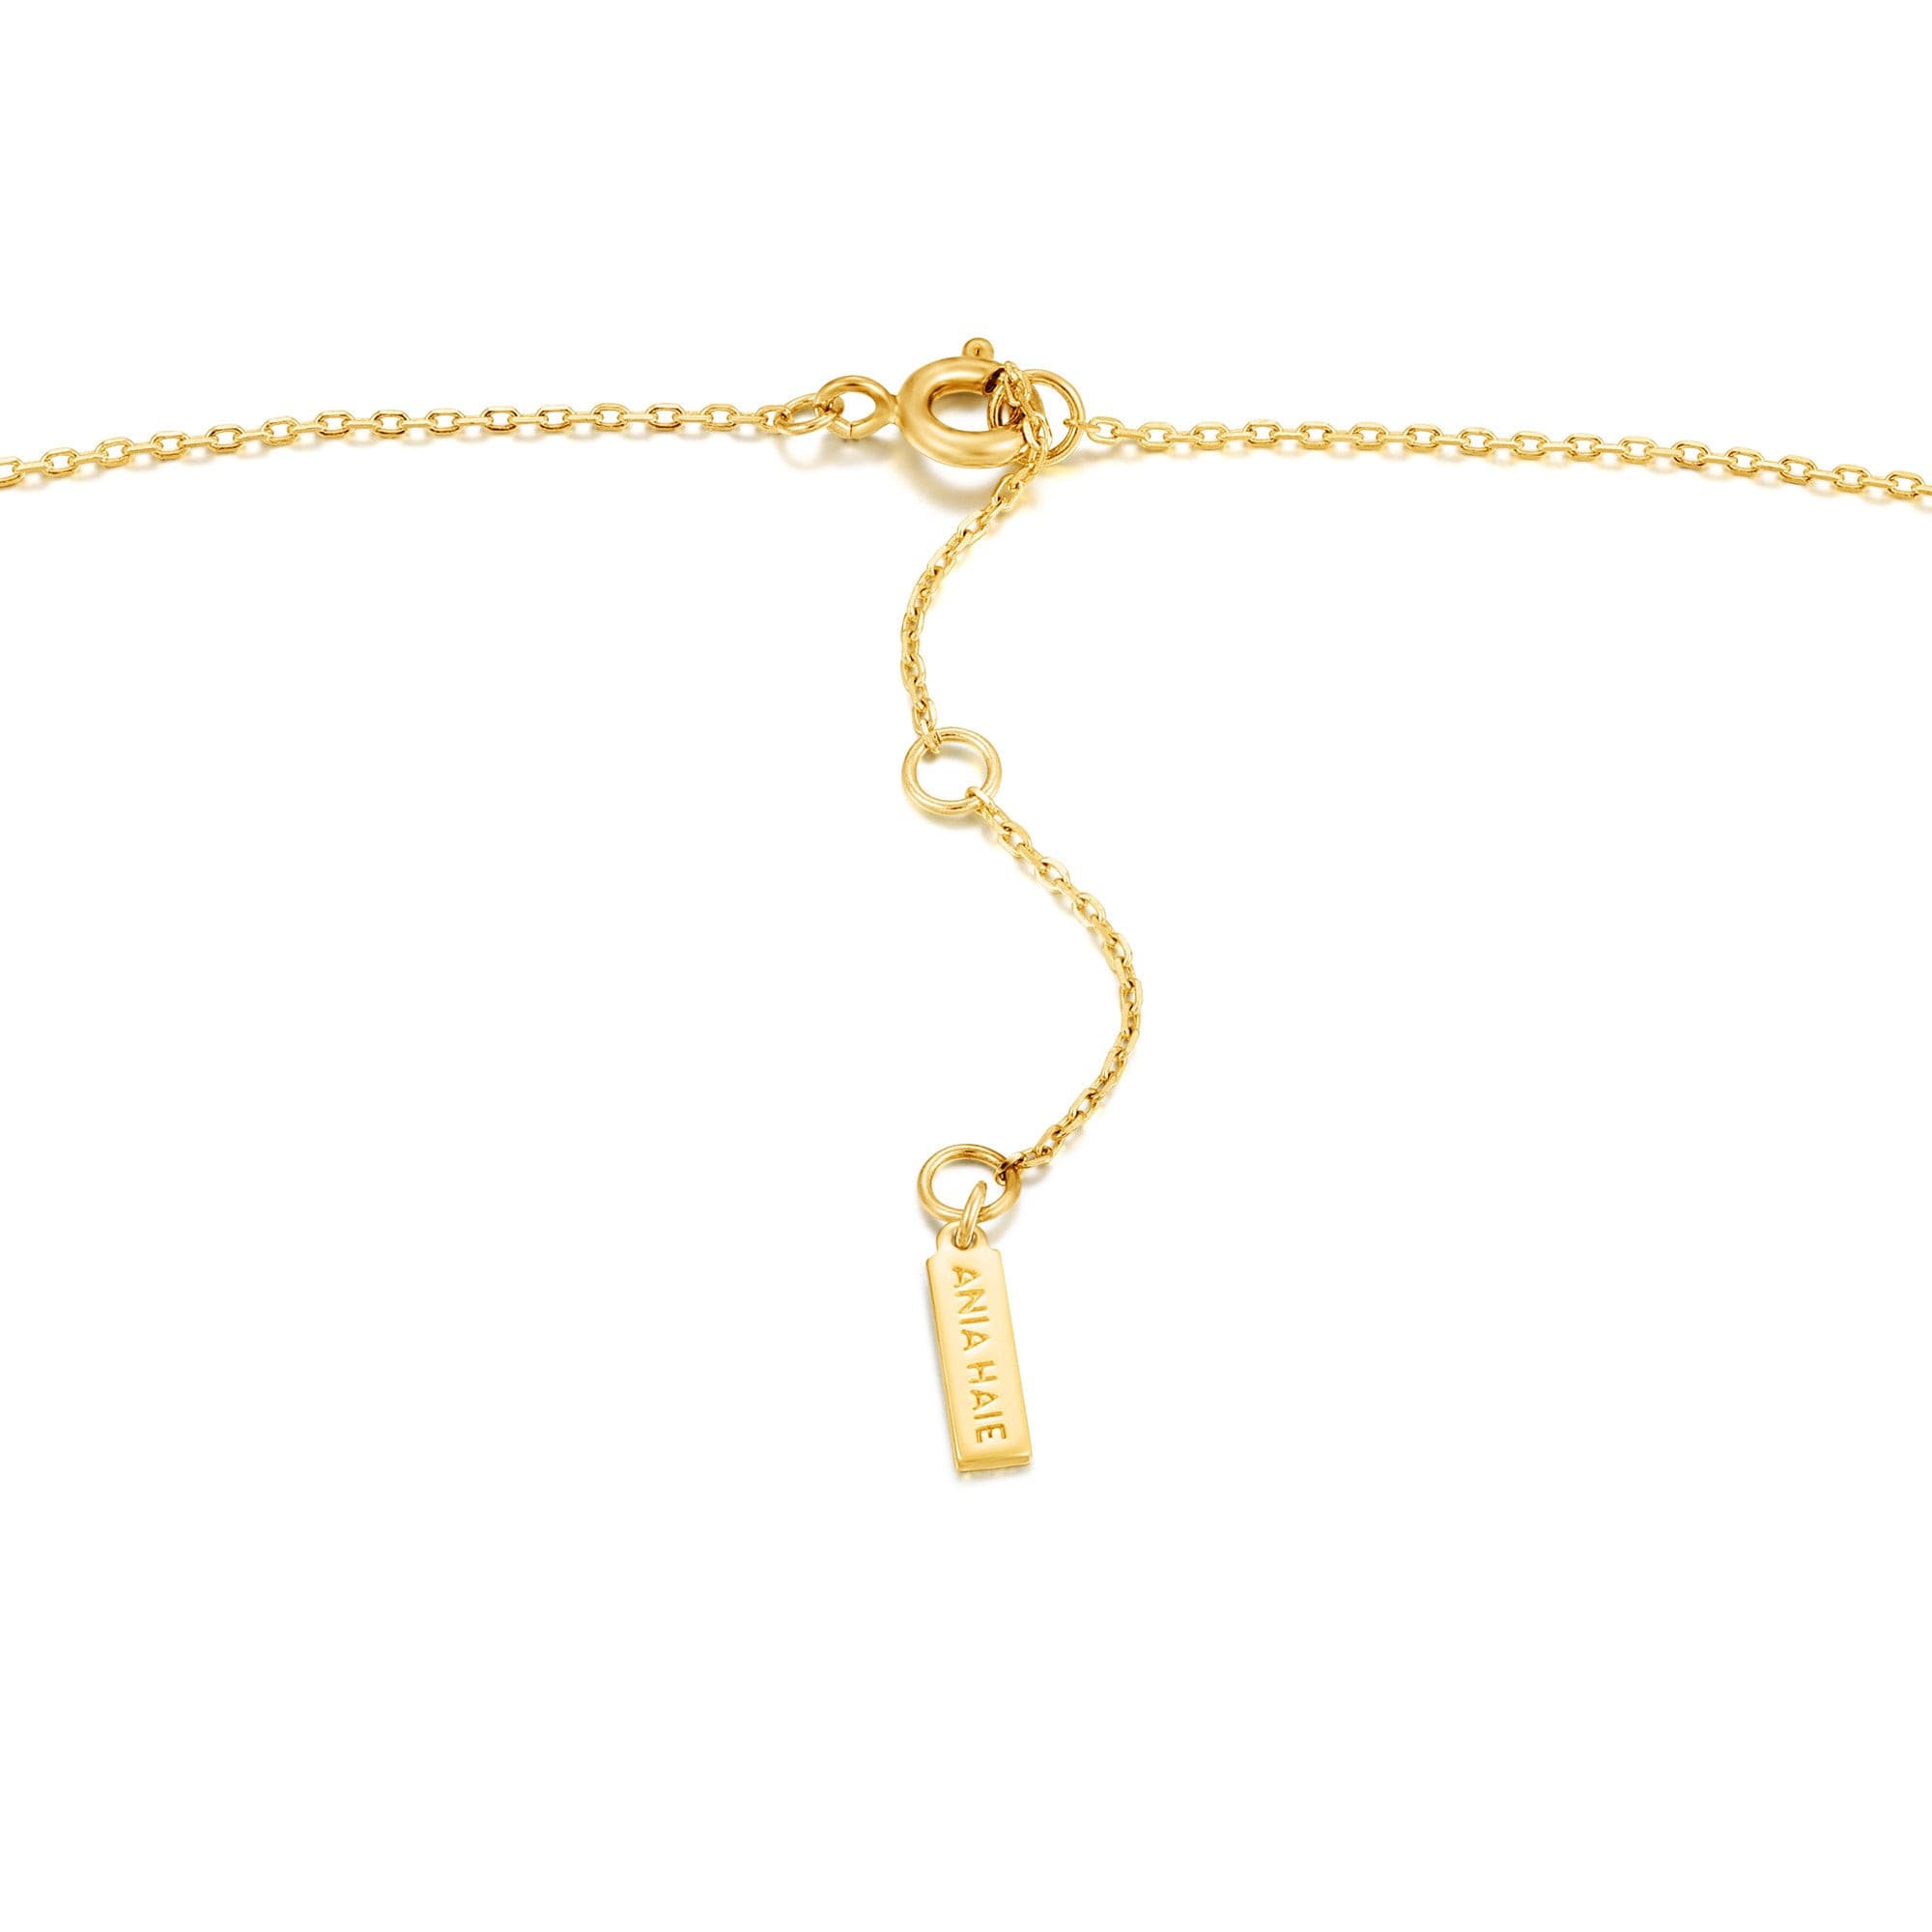 Gold Mother Of Pearl Emblem Necklace Ania Haie